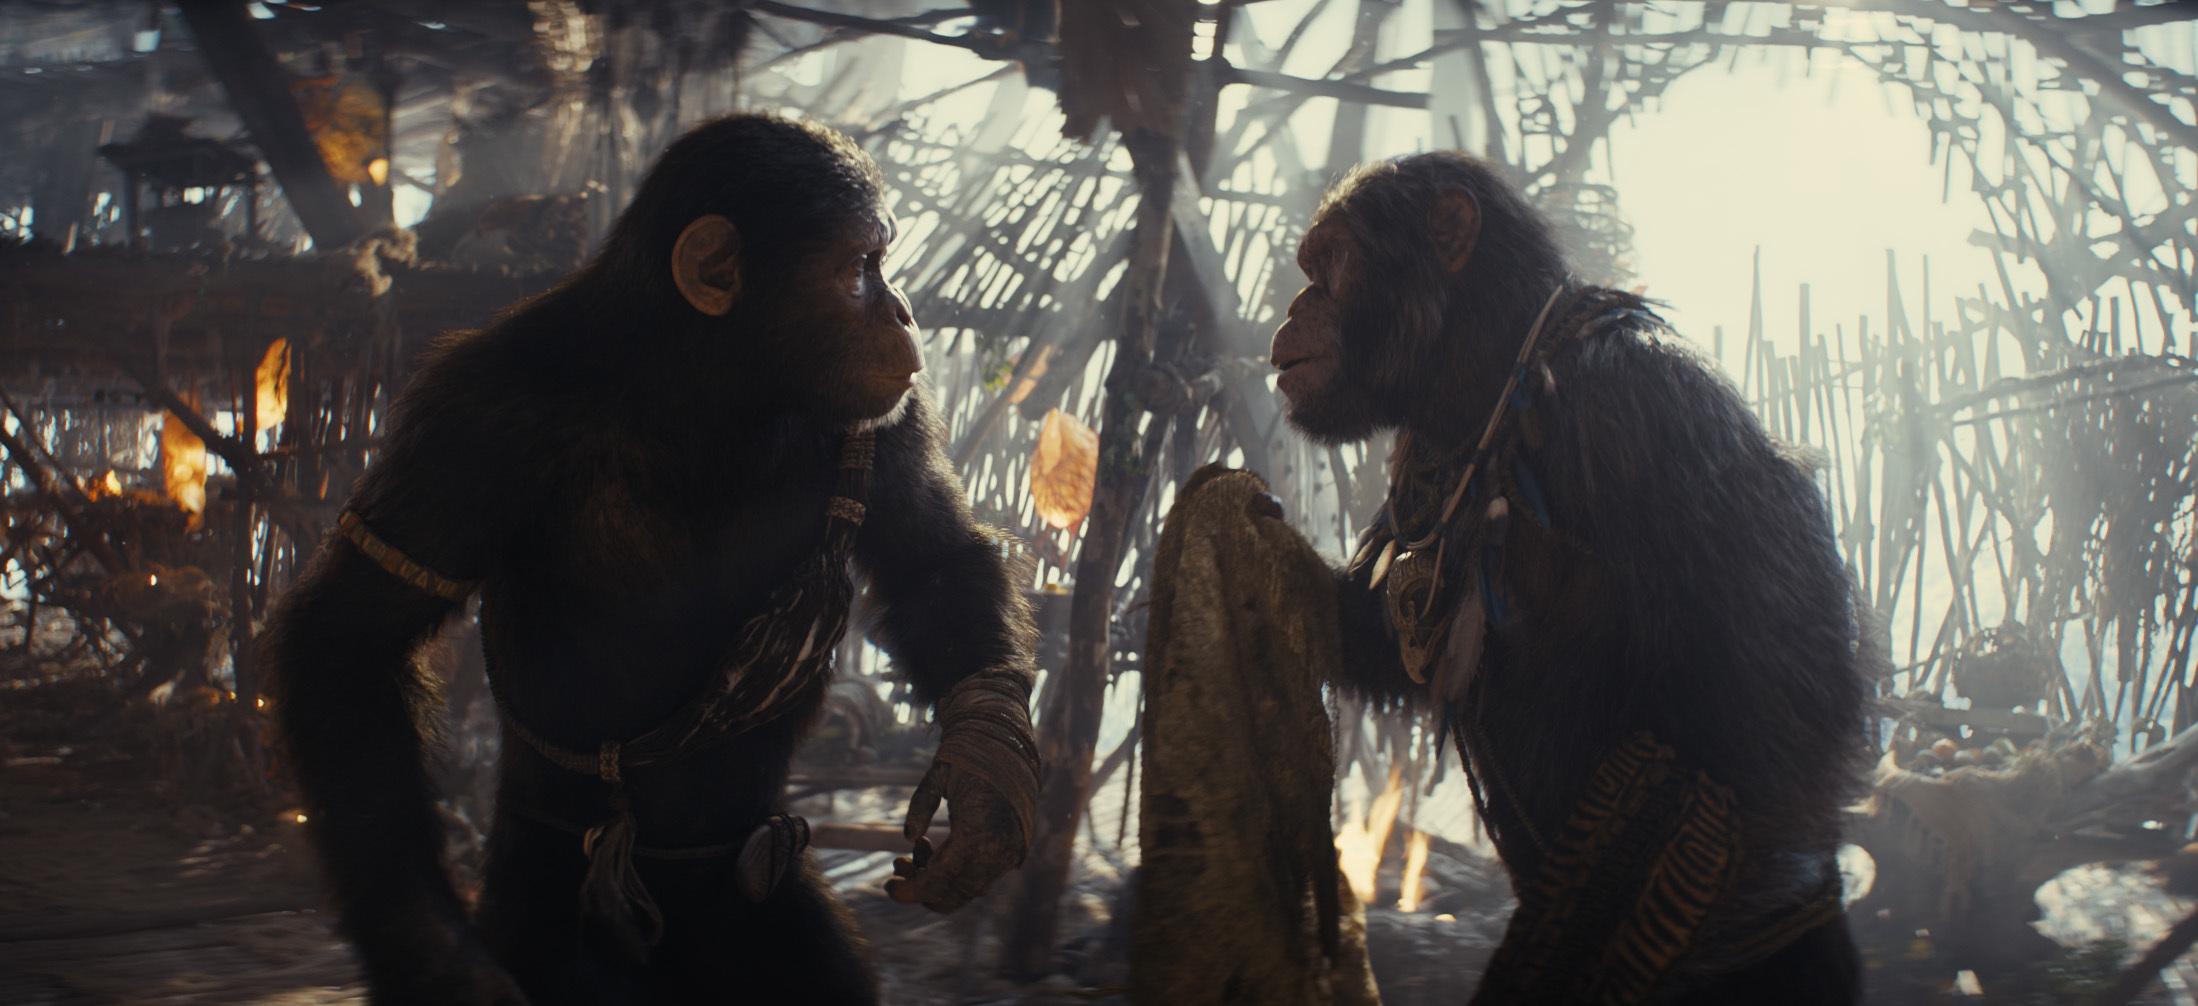 Noa in Kingdom of the Planet of the Apes.